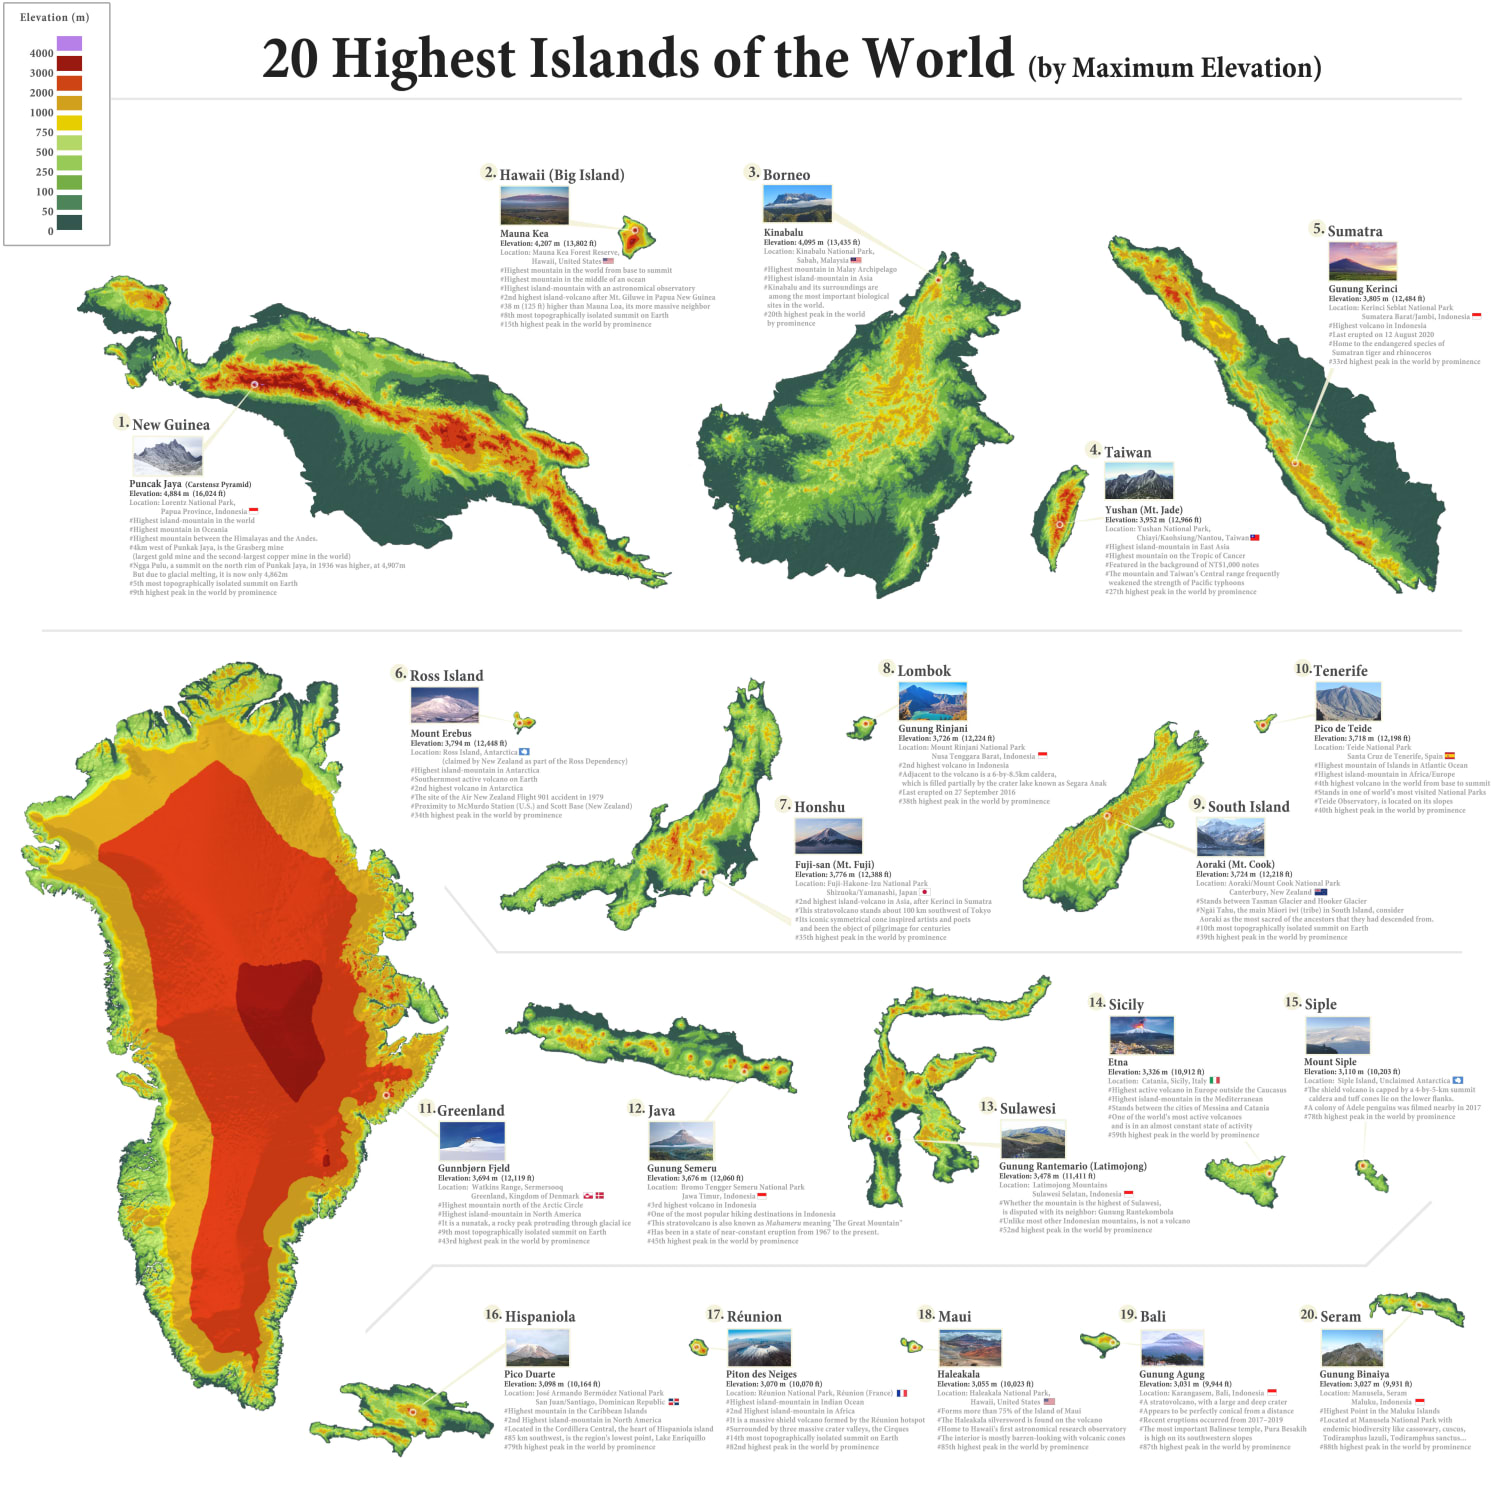 20 Highest Islands of the World